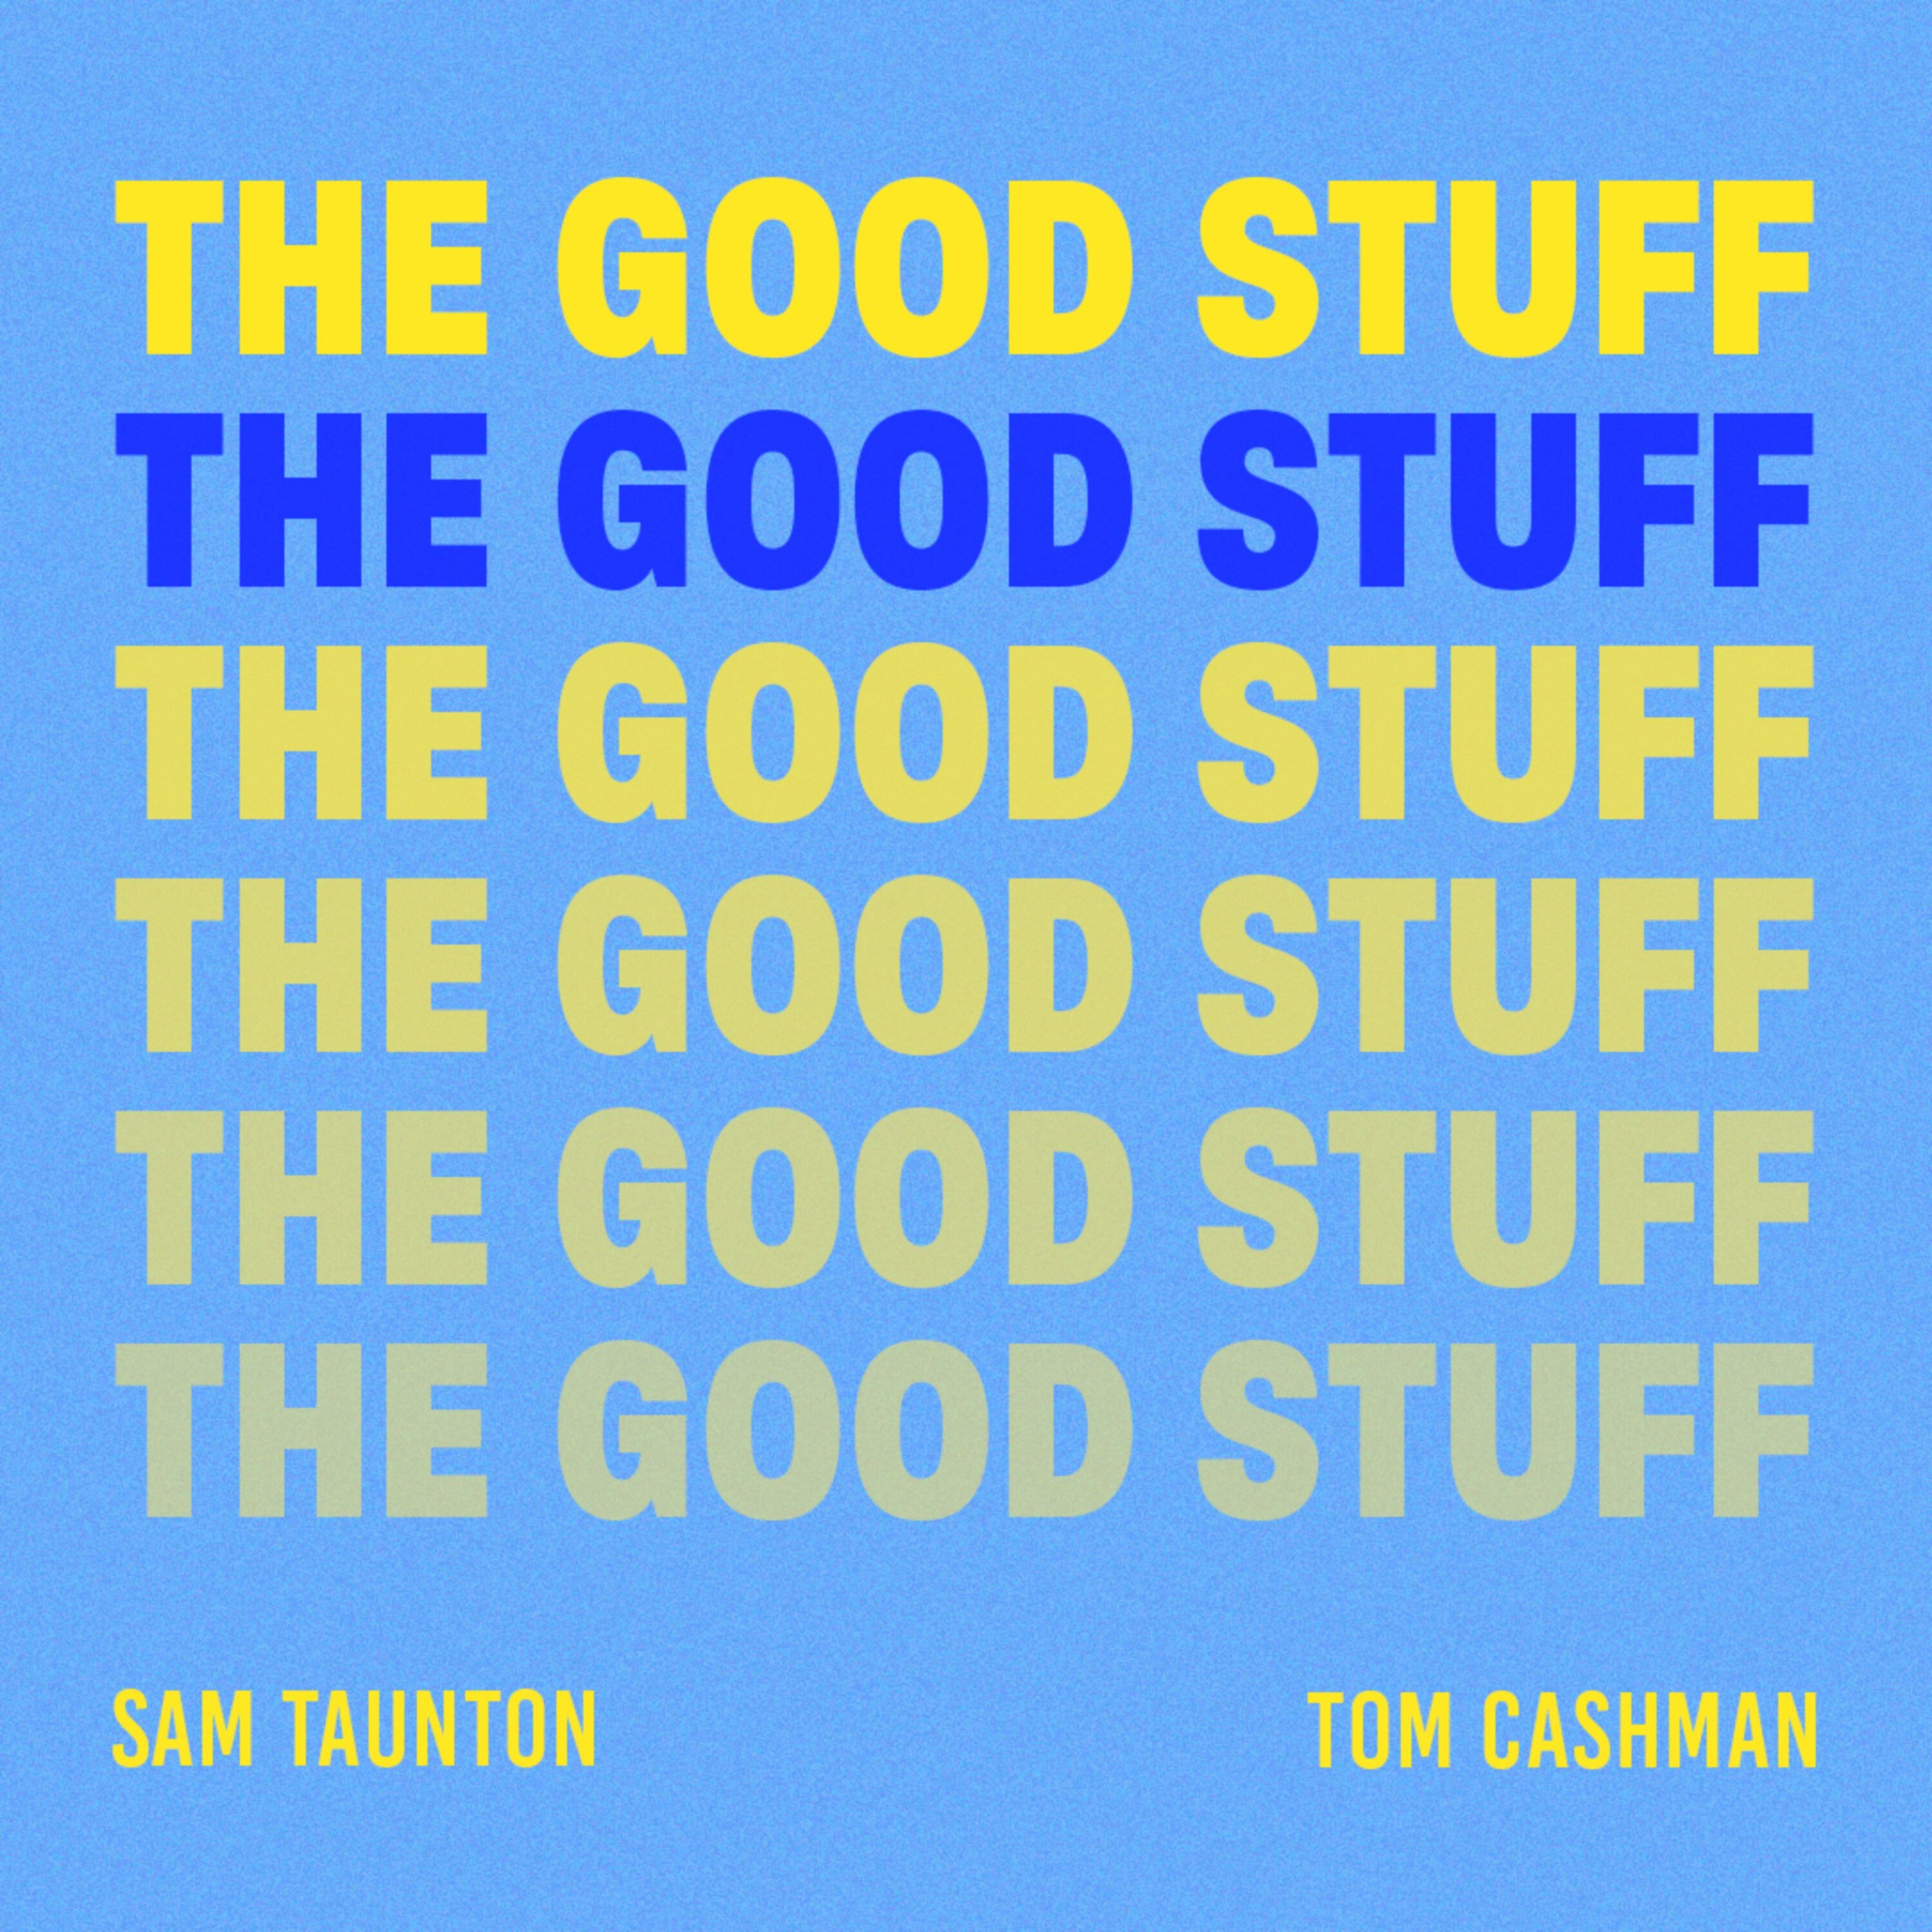 The Good Stuff - Episode 25a Feat. Zoe Coombs Marr